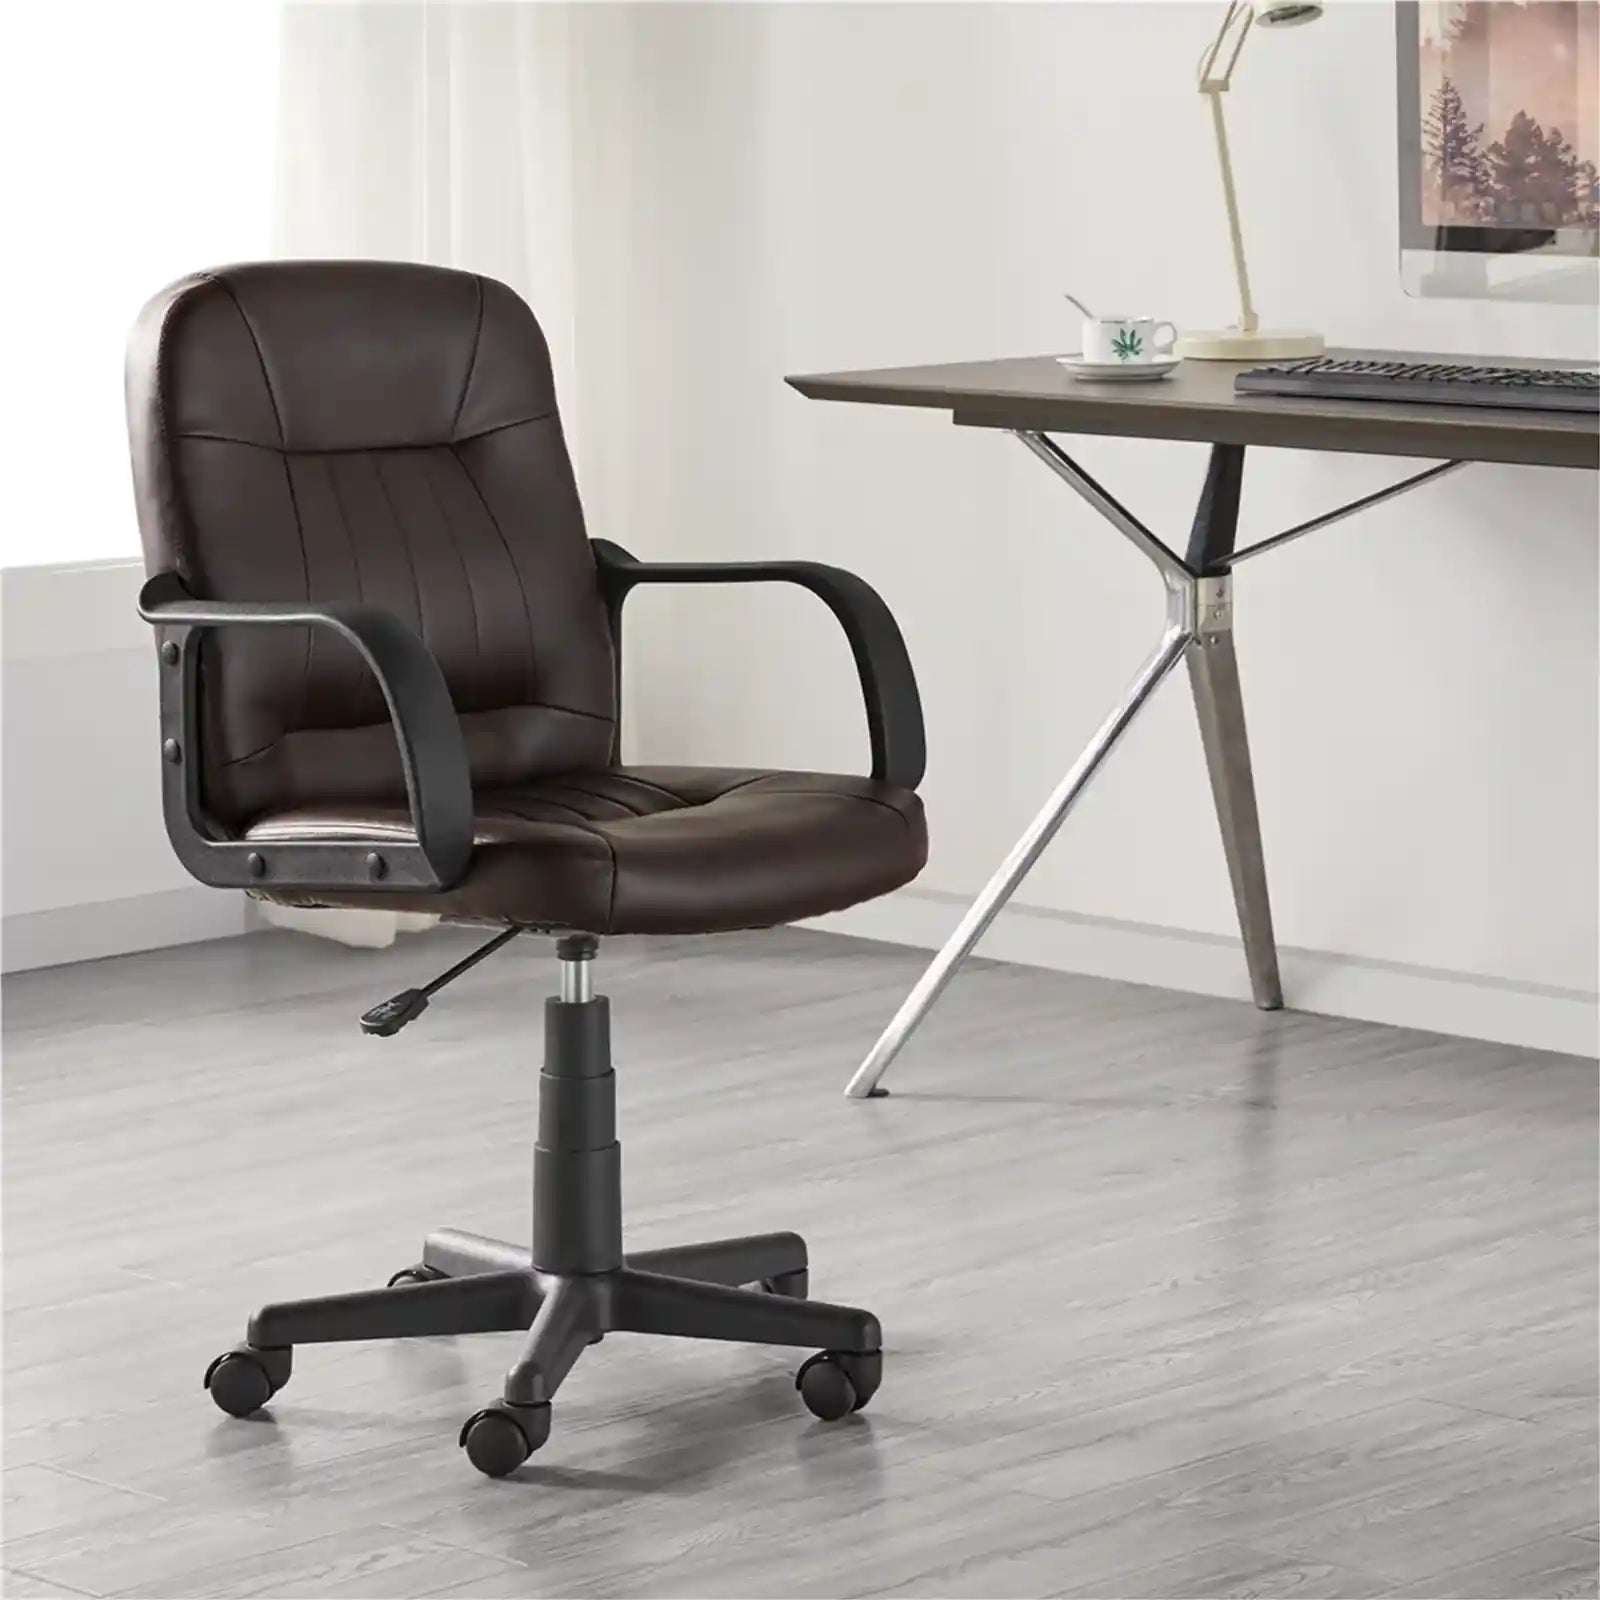 Adjustable Faux Leather Swivel Office Chair